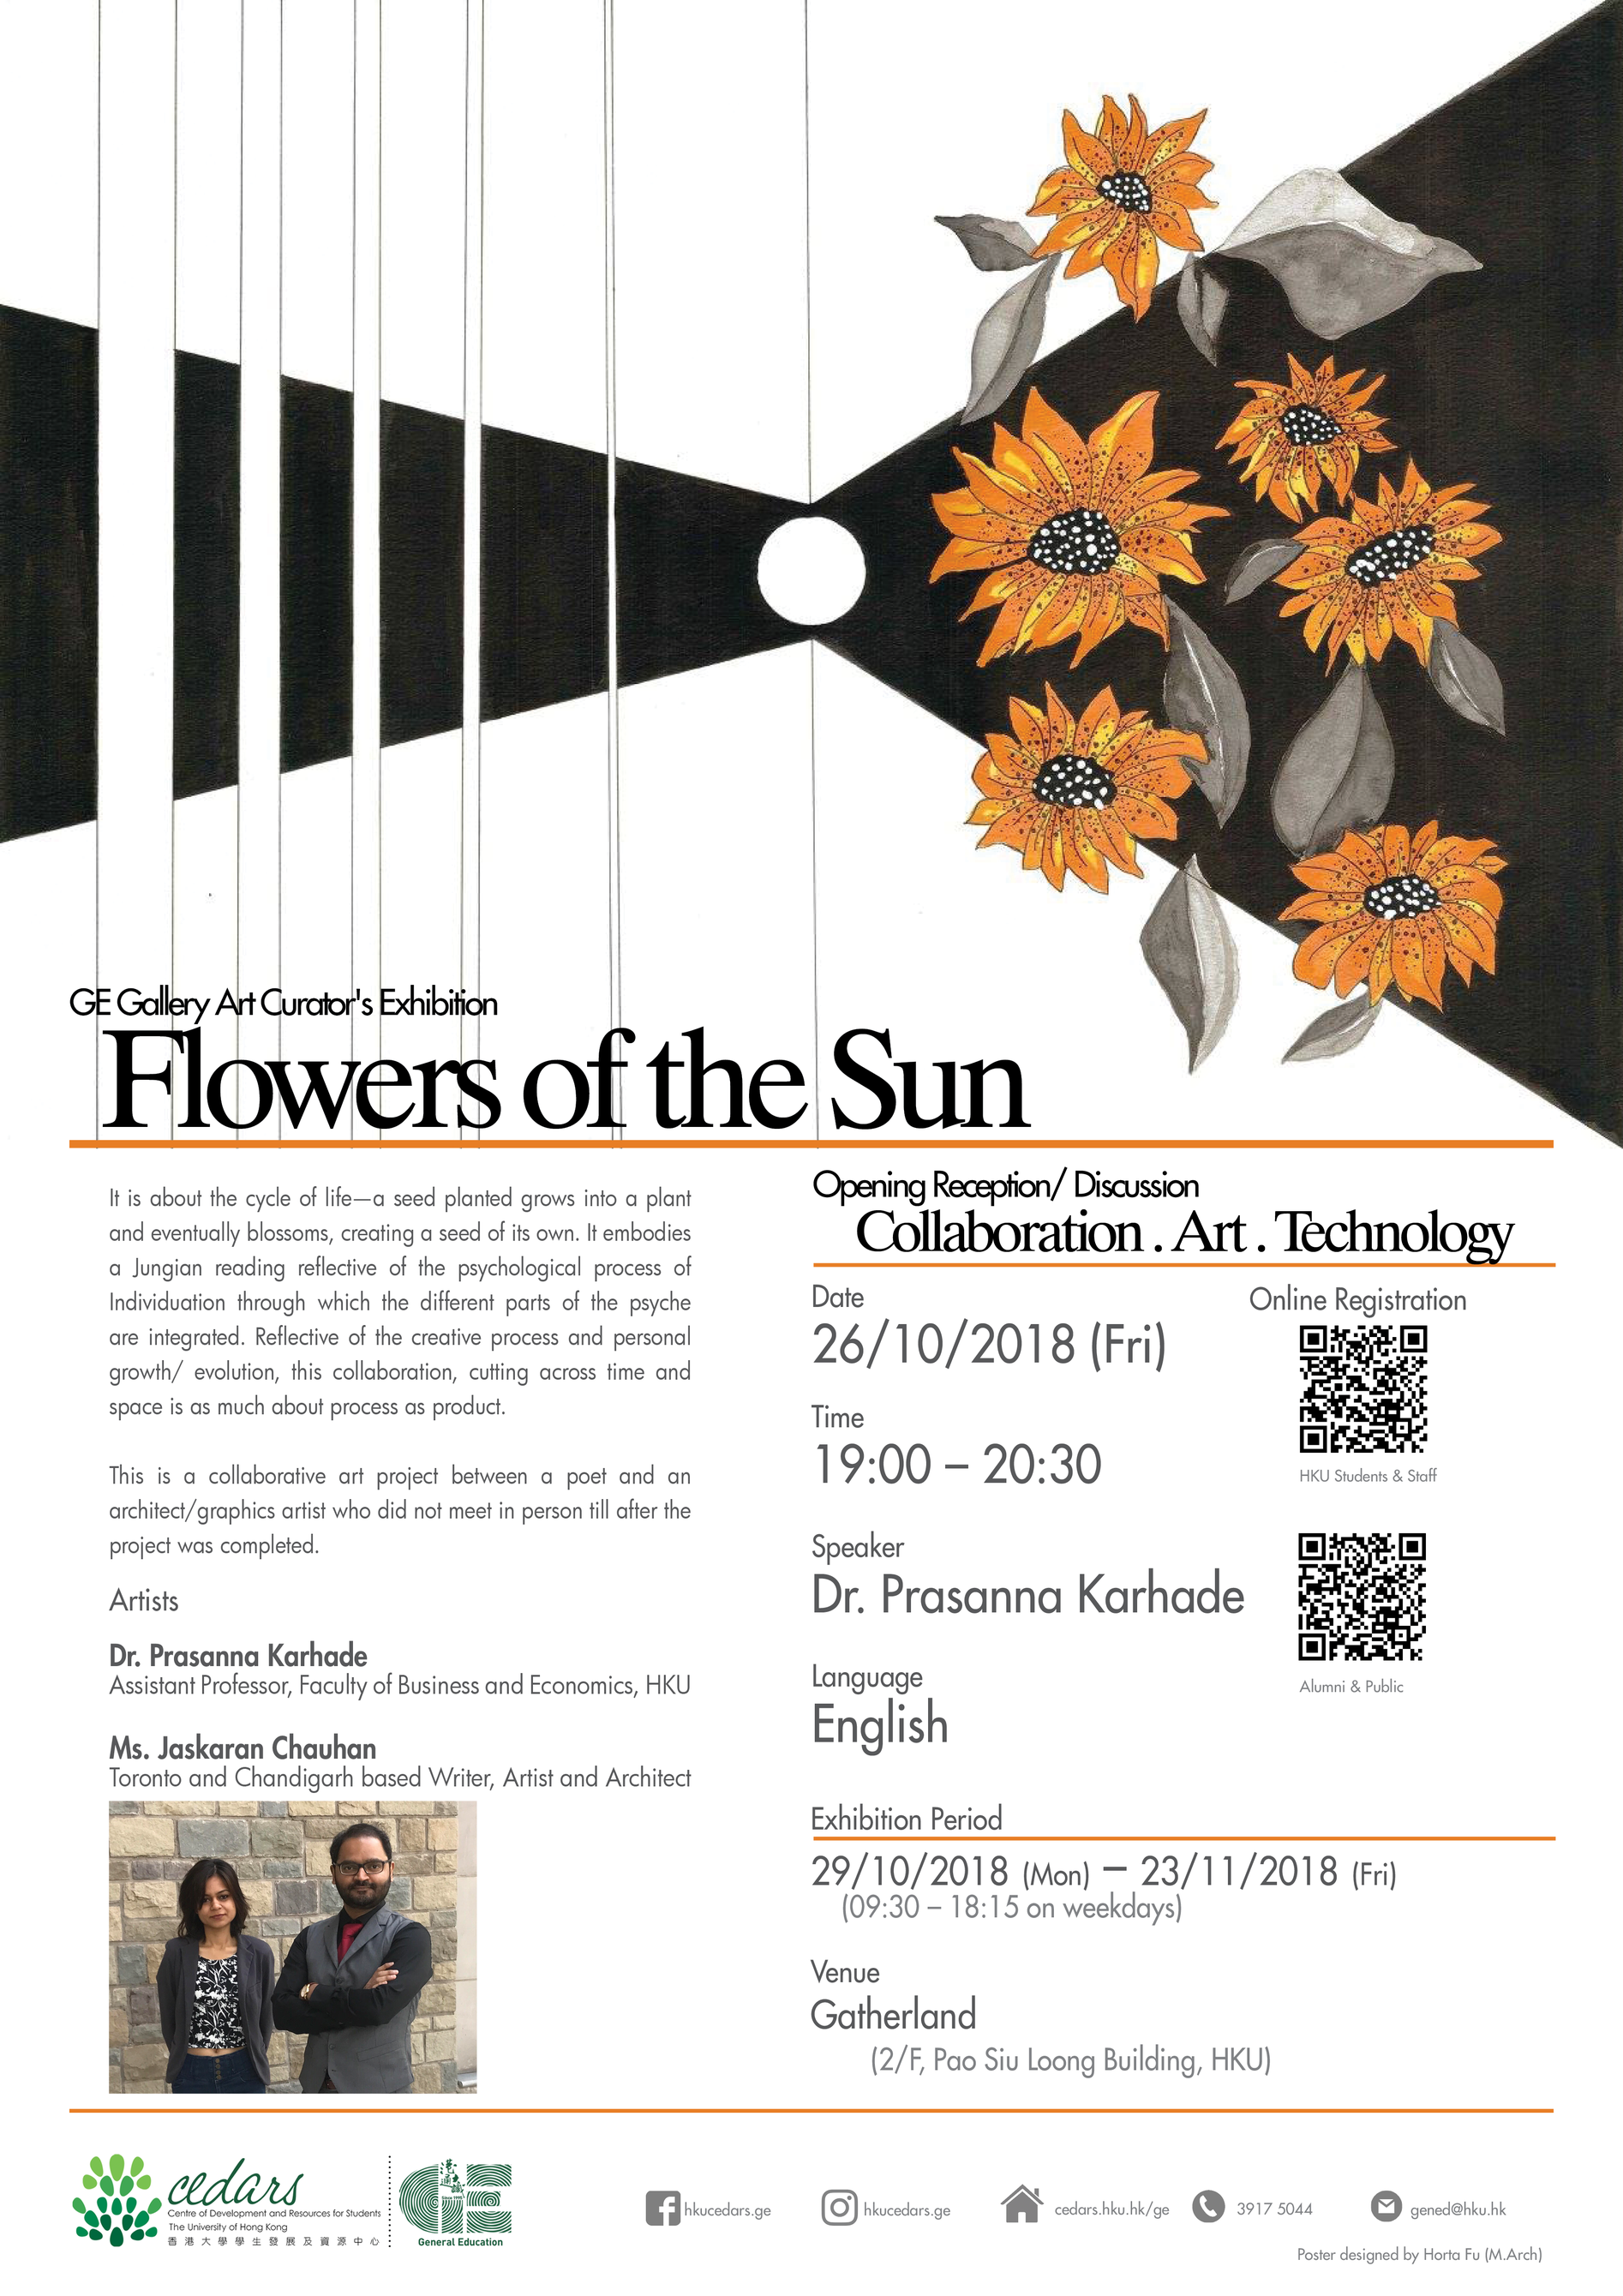 GE Gallery Art Curator‘s Exhibition - Flowers of the Sun 